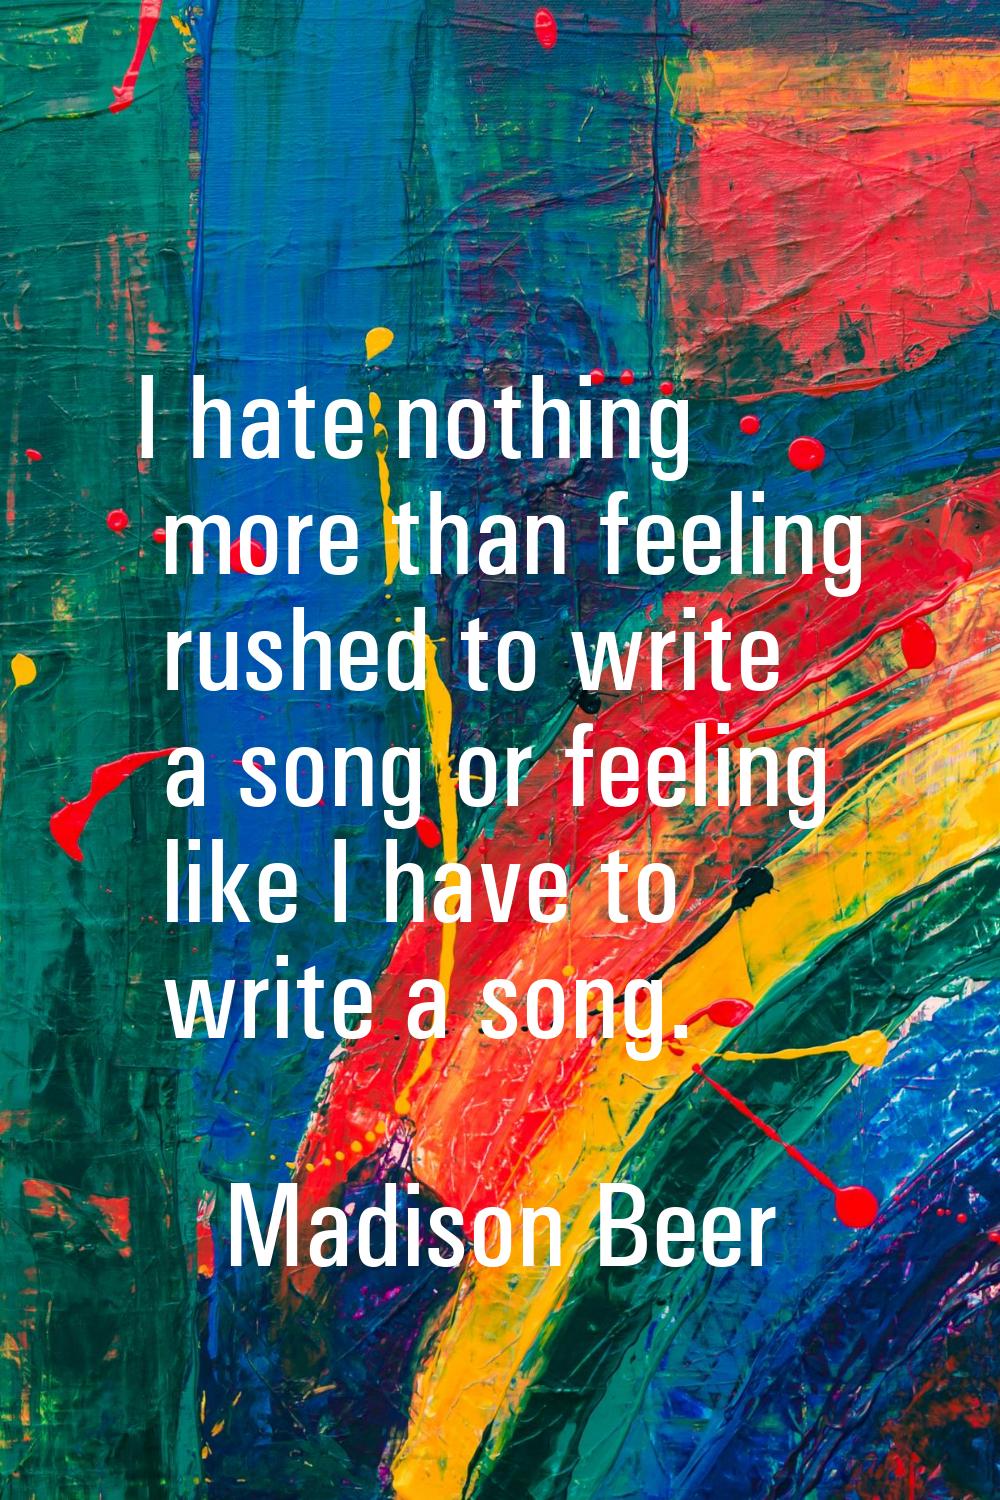 I hate nothing more than feeling rushed to write a song or feeling like I have to write a song.